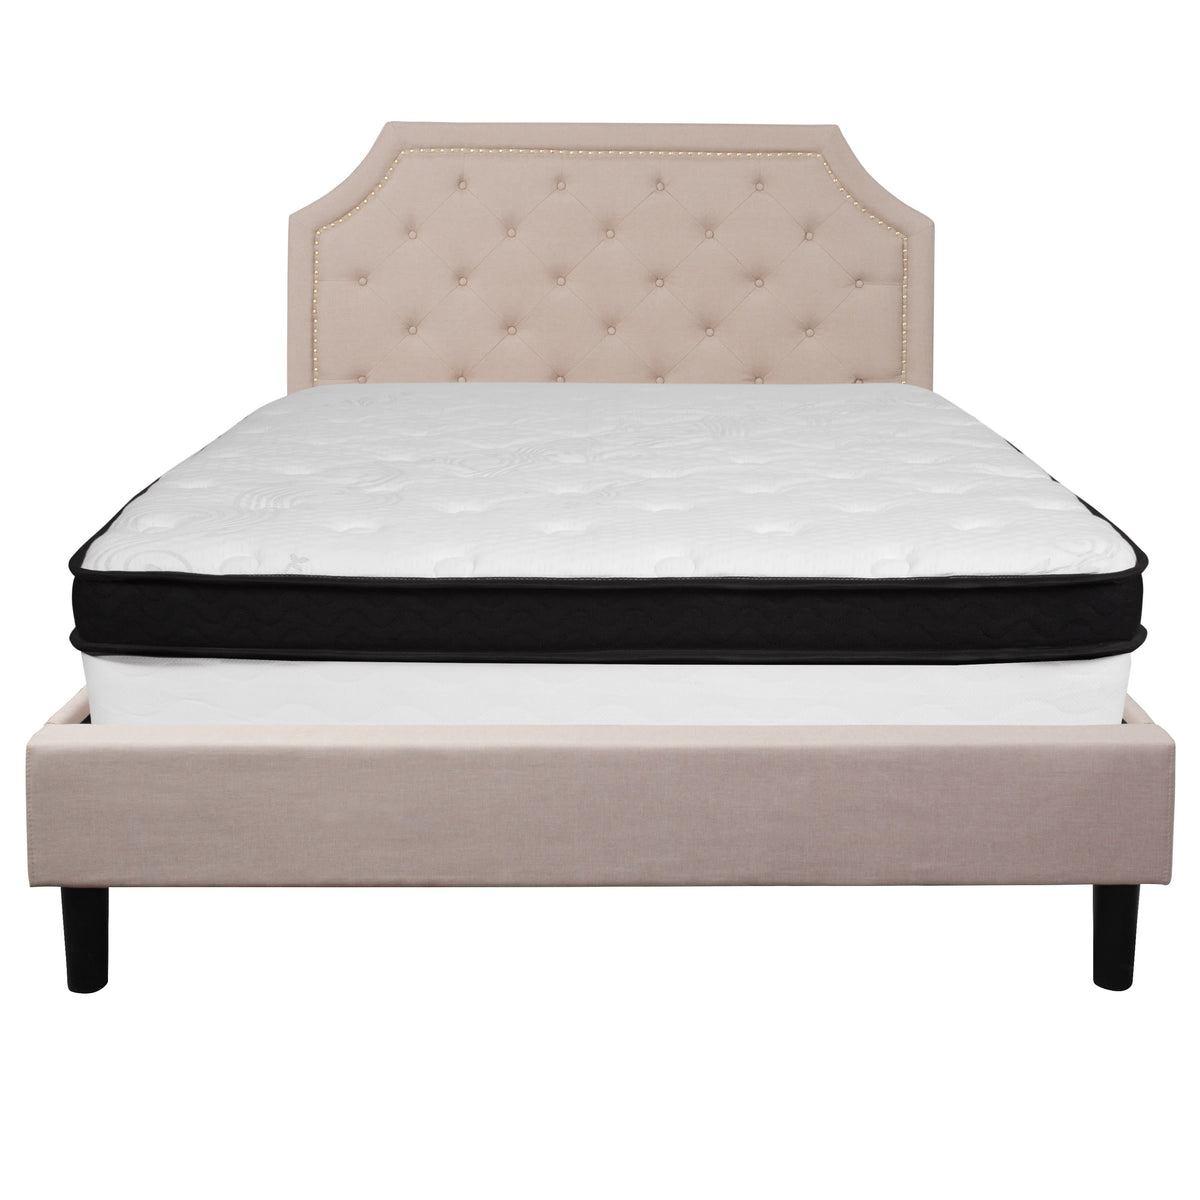 Beige,Queen |#| Queen Size Arched Tufted Beige Fabric Platform Bed with Memory Foam Mattress